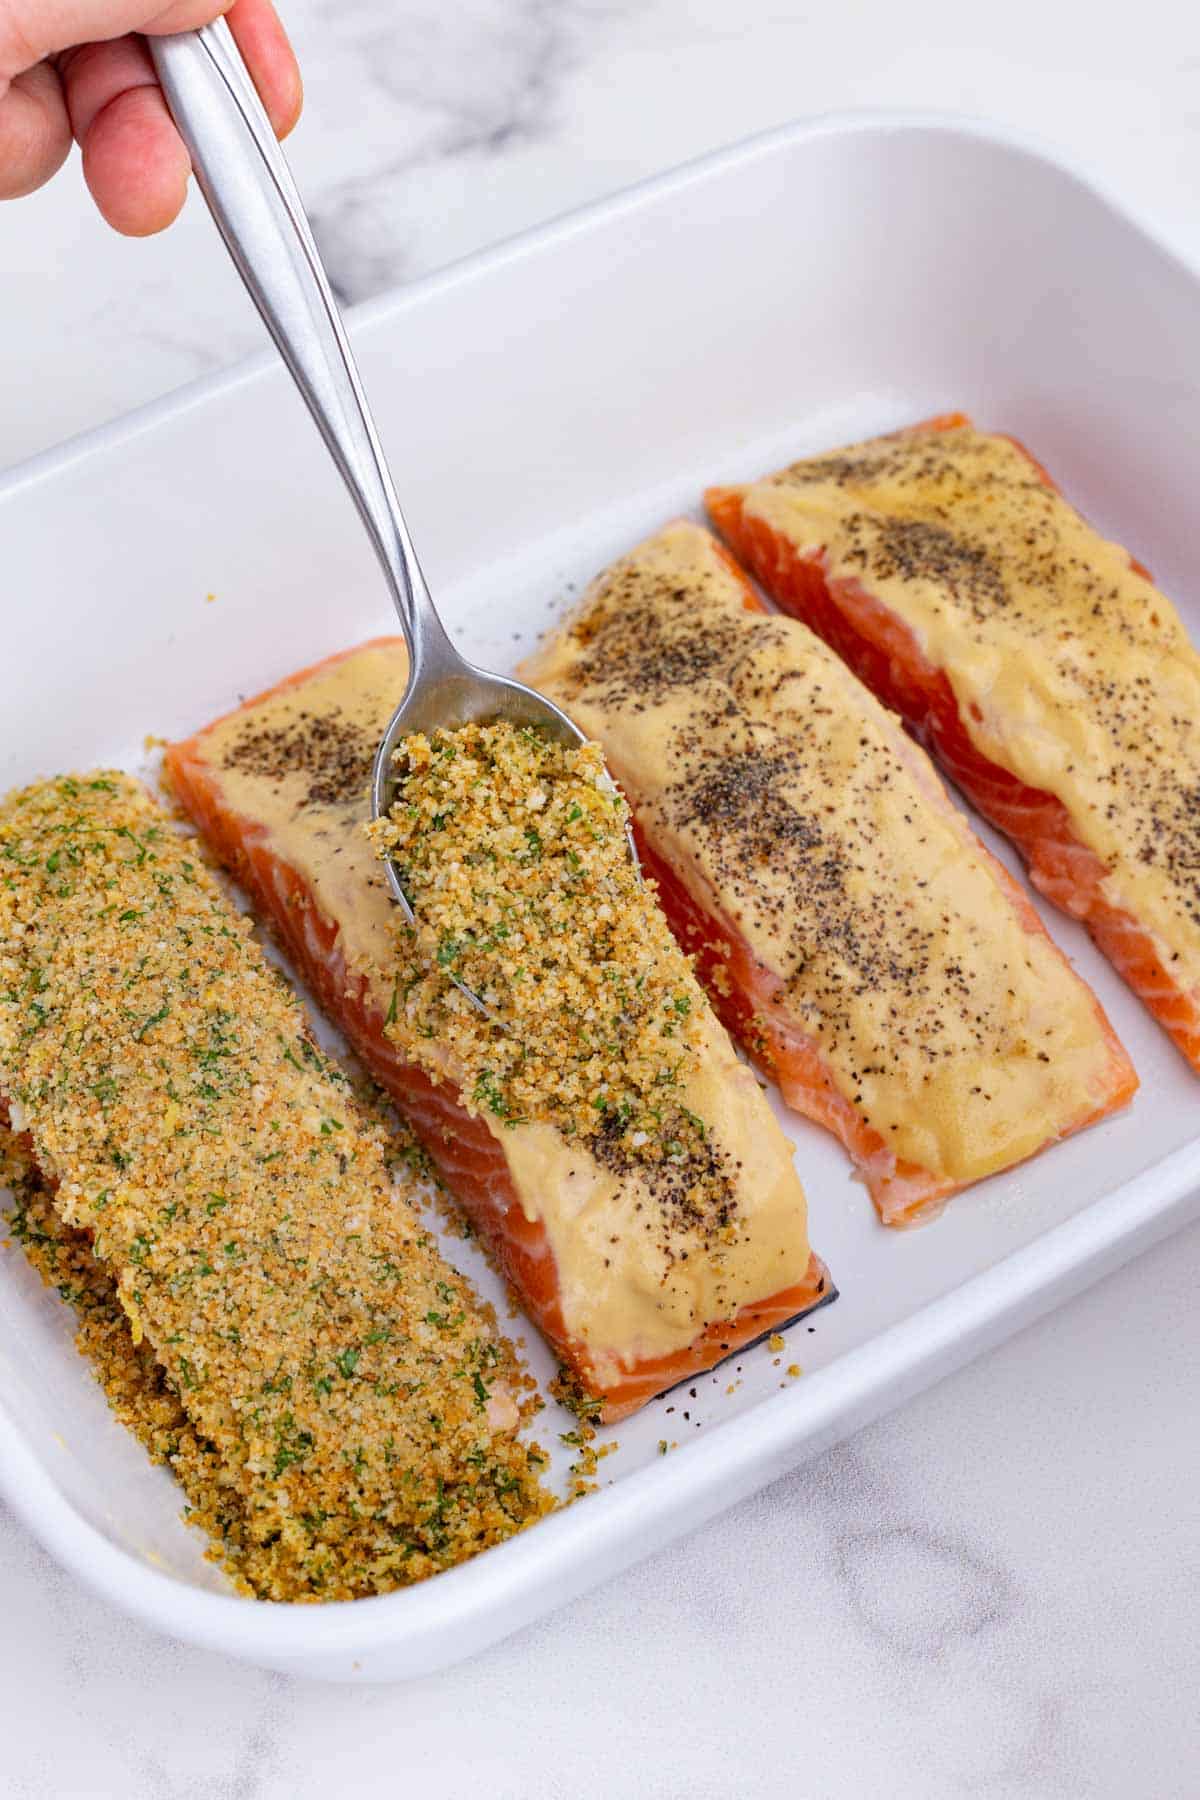 The breadcrumb mixture is placed on top of the salmon filets.